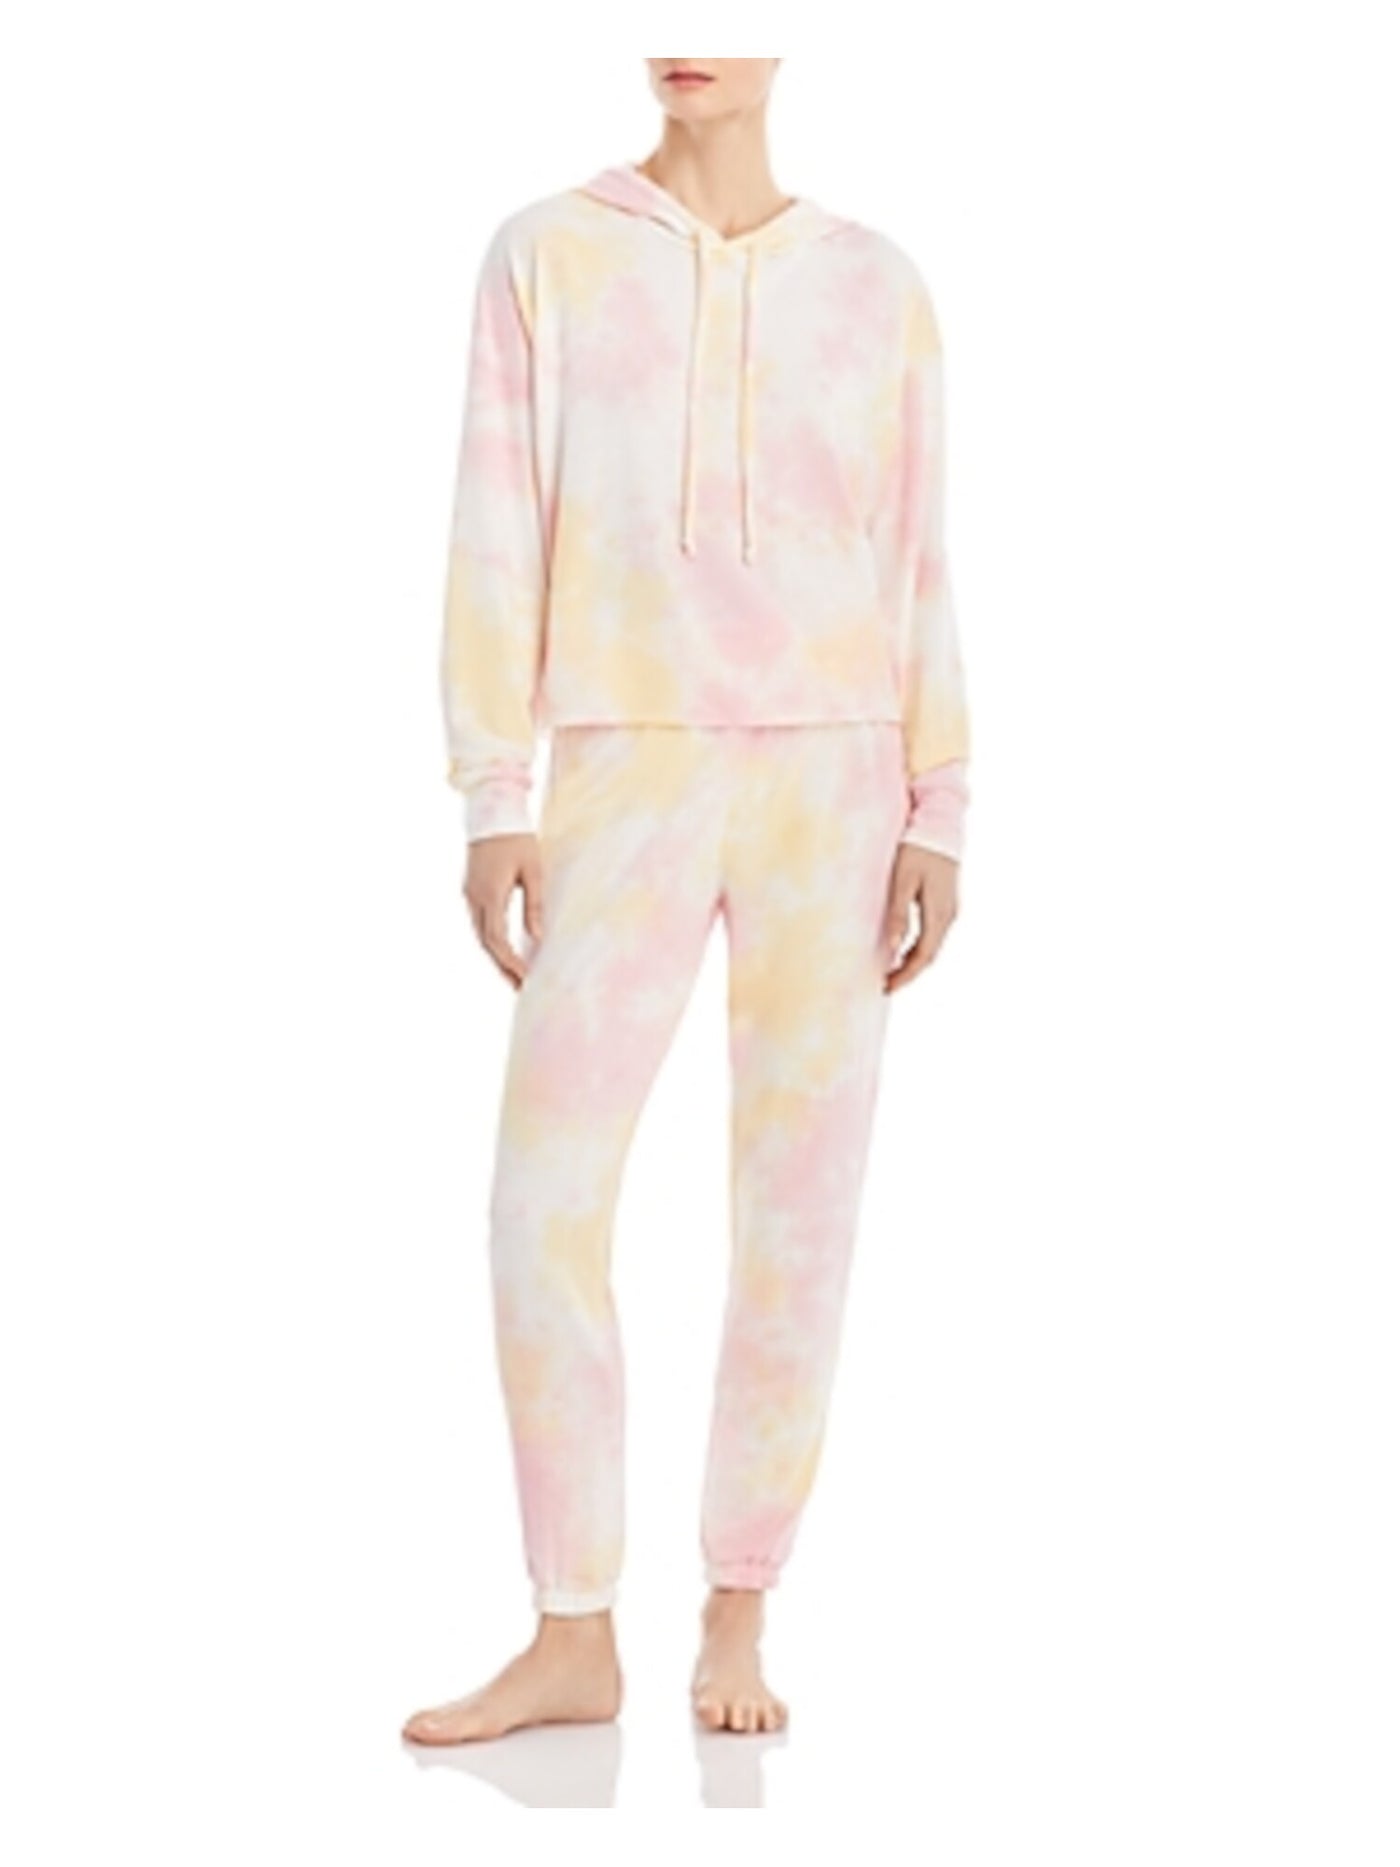 AVA & ESME Womens Pink Stretch Tie Jogger With Hoodie Tie Dye Long Sleeve Lounge Pant Suit L